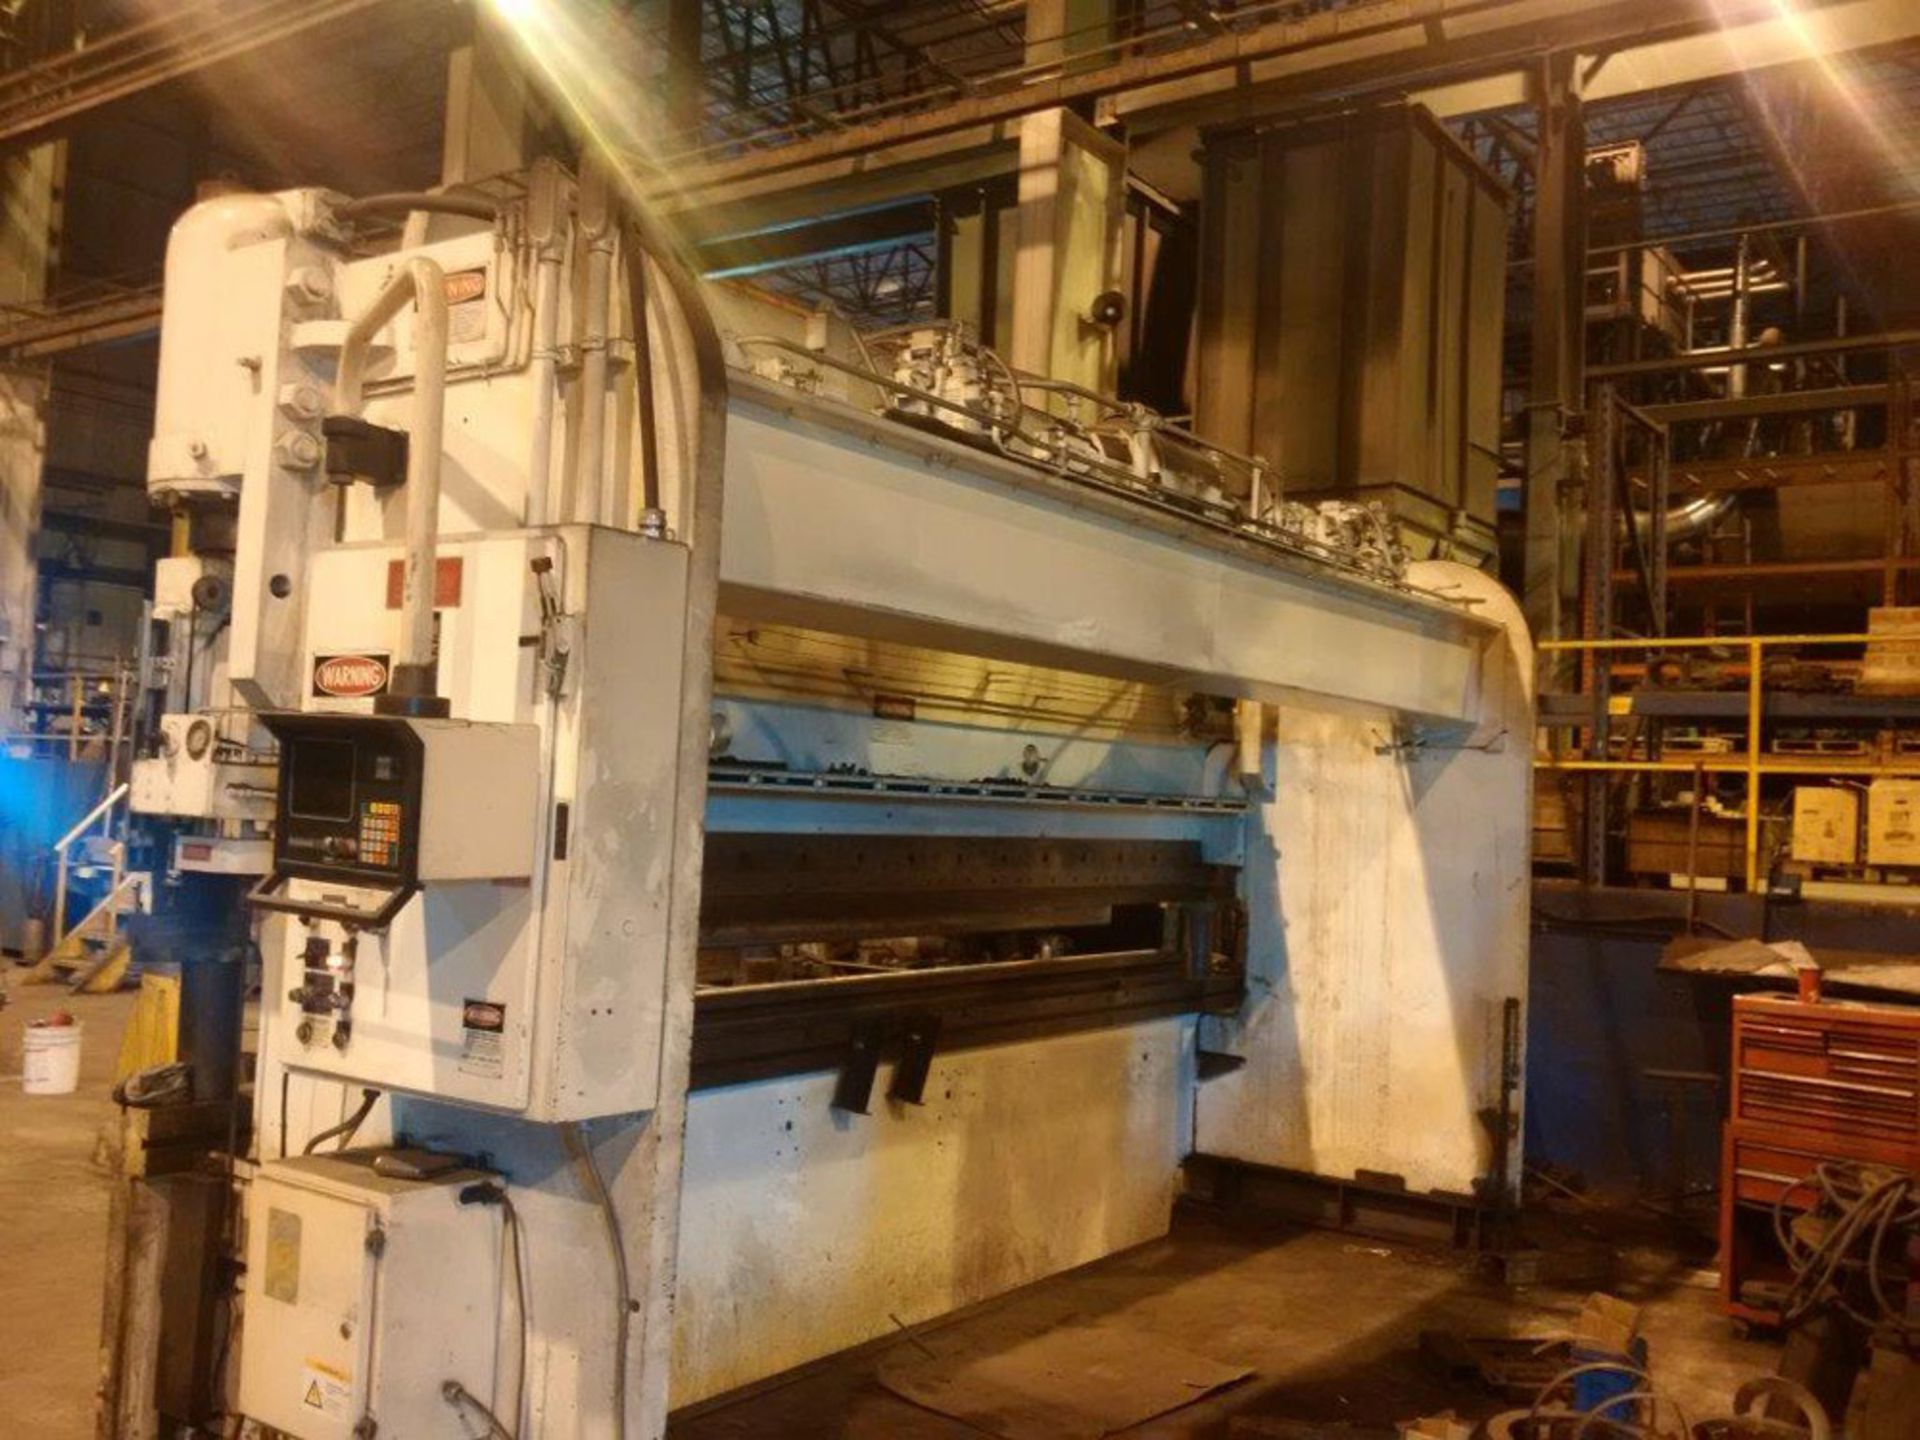 Pacific CNC 2 Axis Hyd. Press Brake, 300-Ton x 20' - Located In Painesville, OH - 7327 - Image 2 of 8